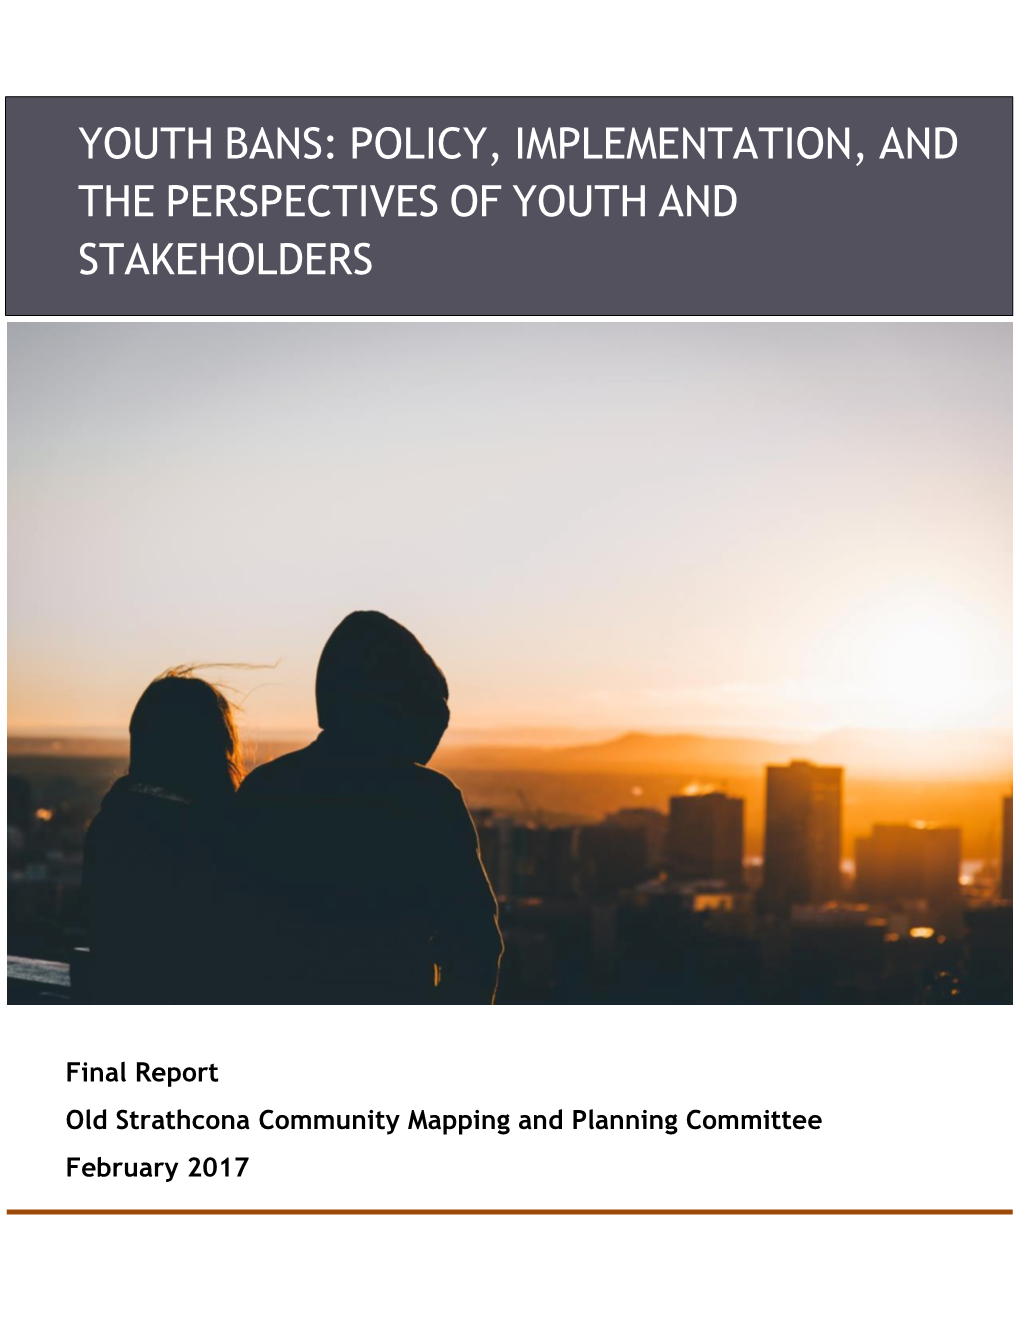 Youth Bans: Policy, Implementation, and Perspectives